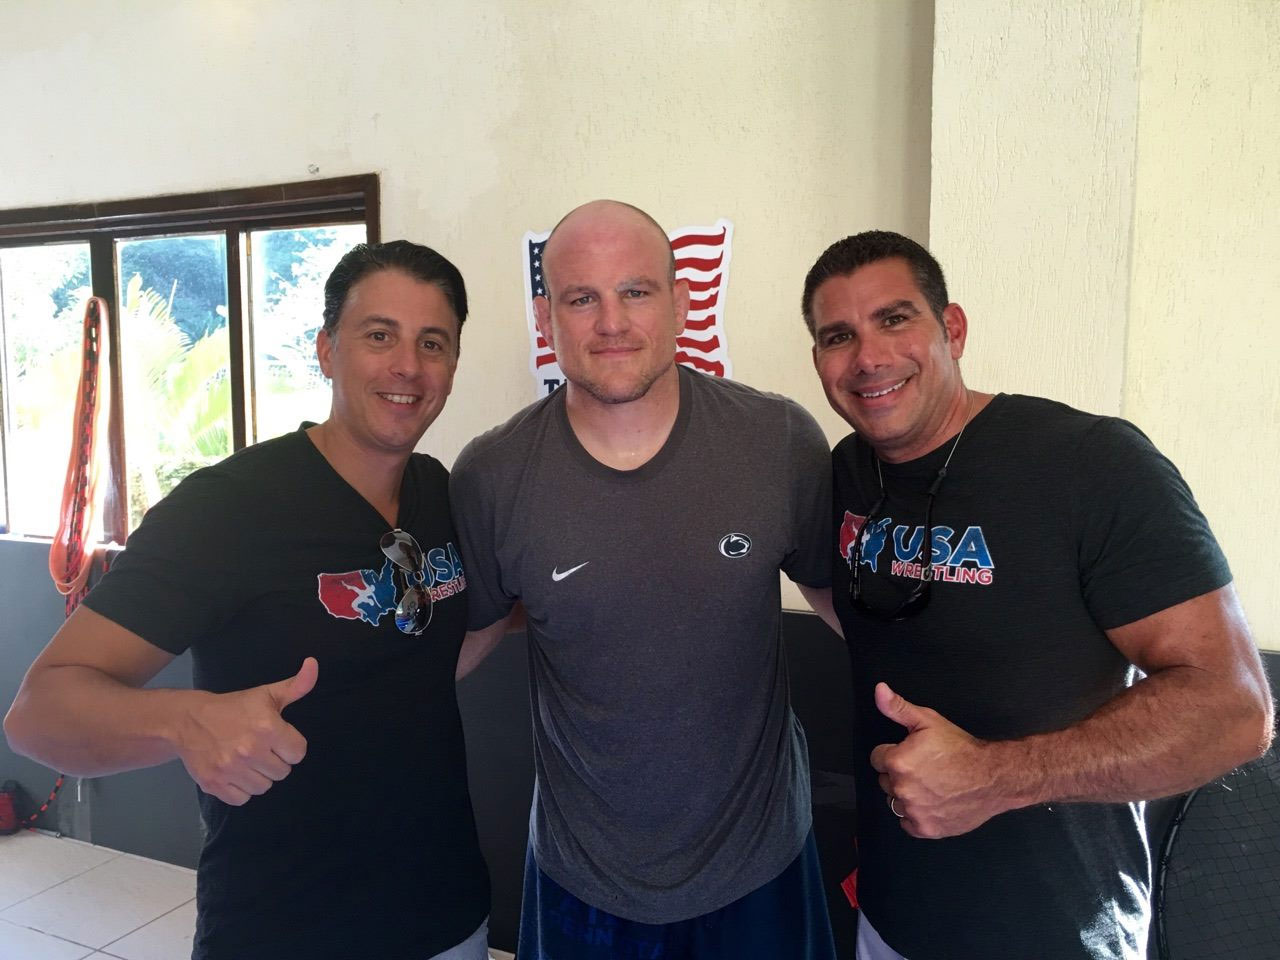 Dr. Mike, US Coach Cael Sanderson, and Dr. Carl Conforti